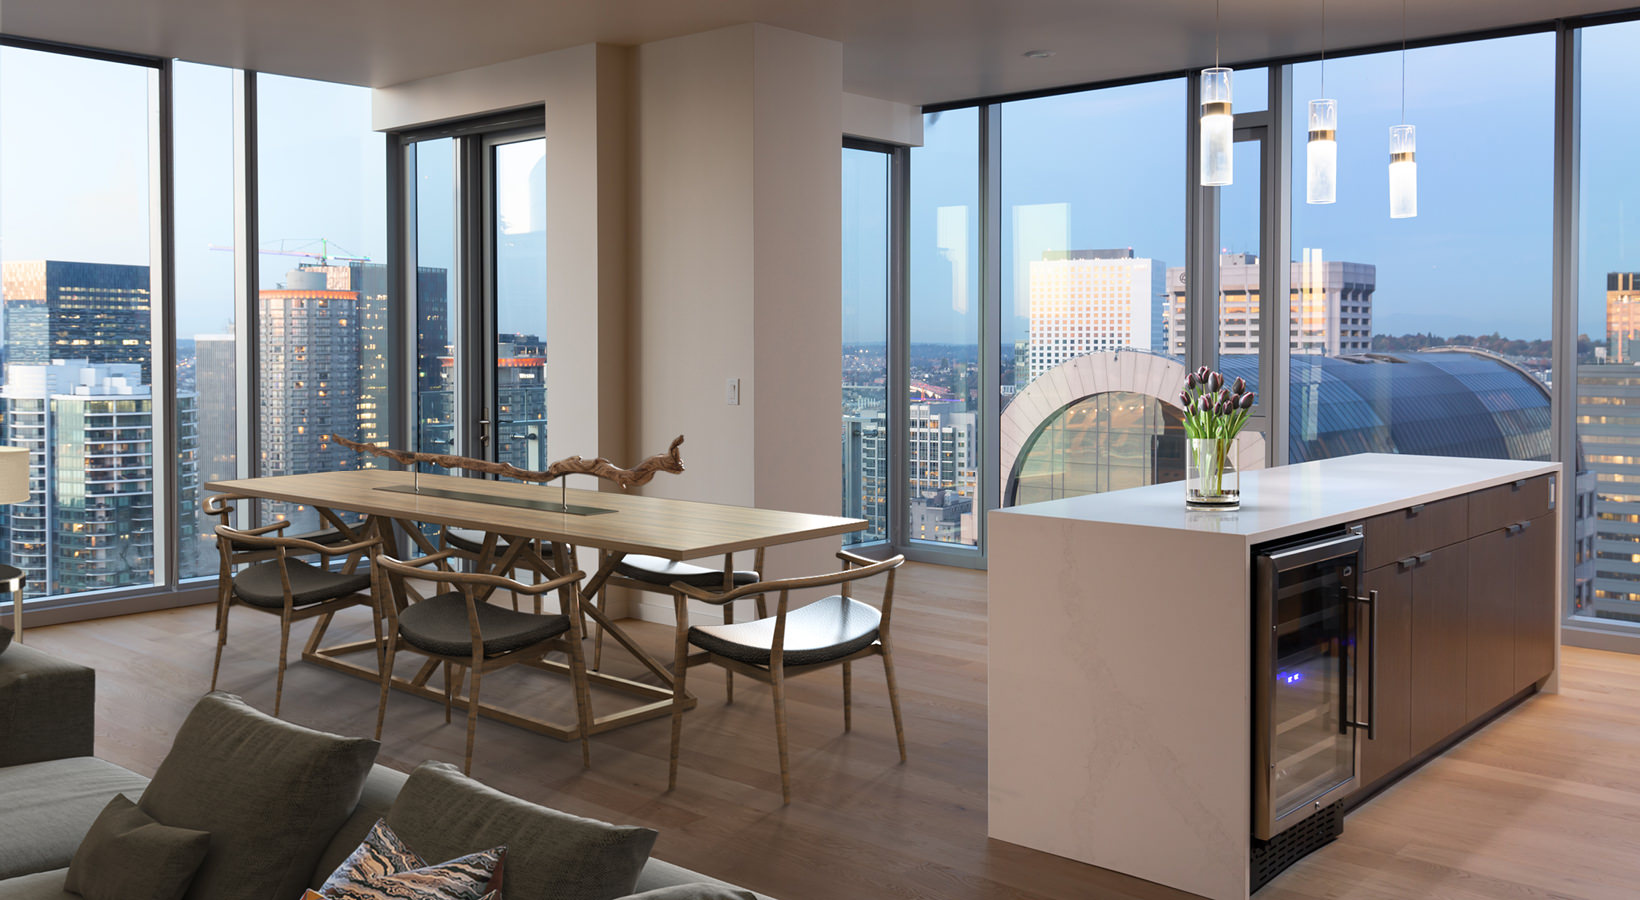 open dining area with city views and private balcony access